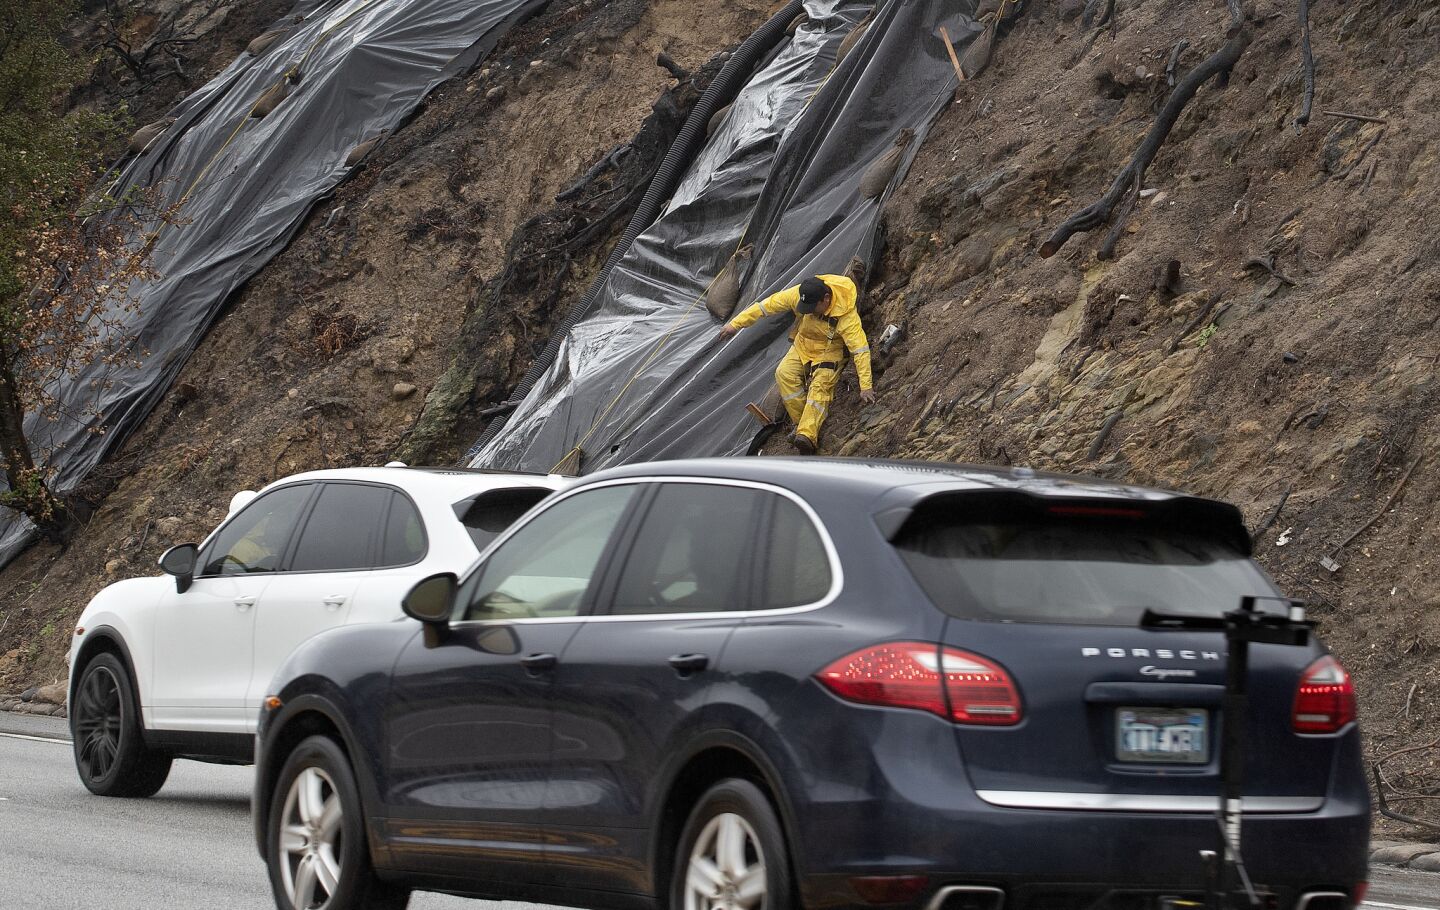 Rolly Chinan makes his way down a hillside after securing a tarp on Pacific Coast Highway in Malibu.